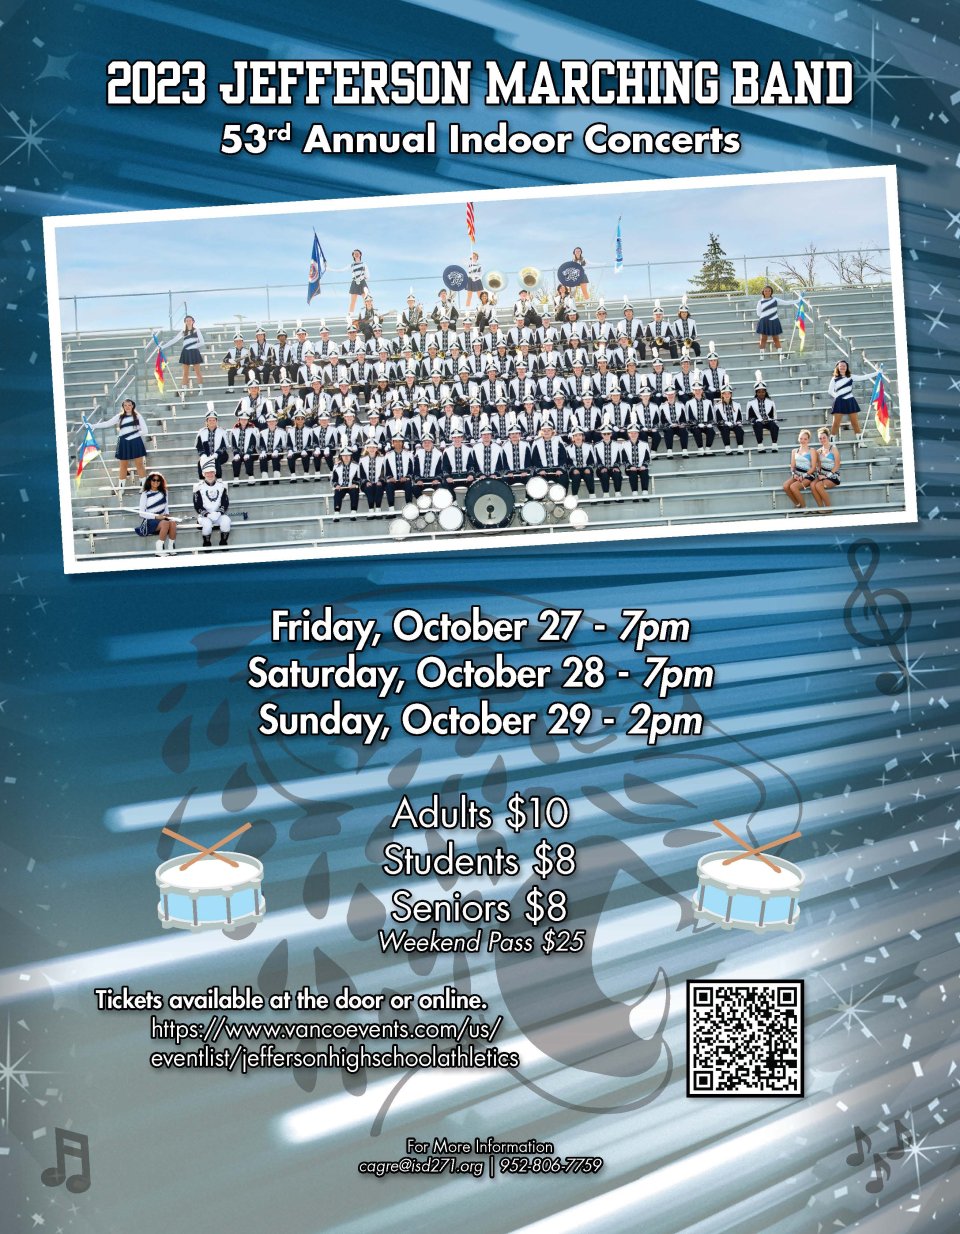 Flyer for 2023 Jefferson Marching Band Indoor Concerts